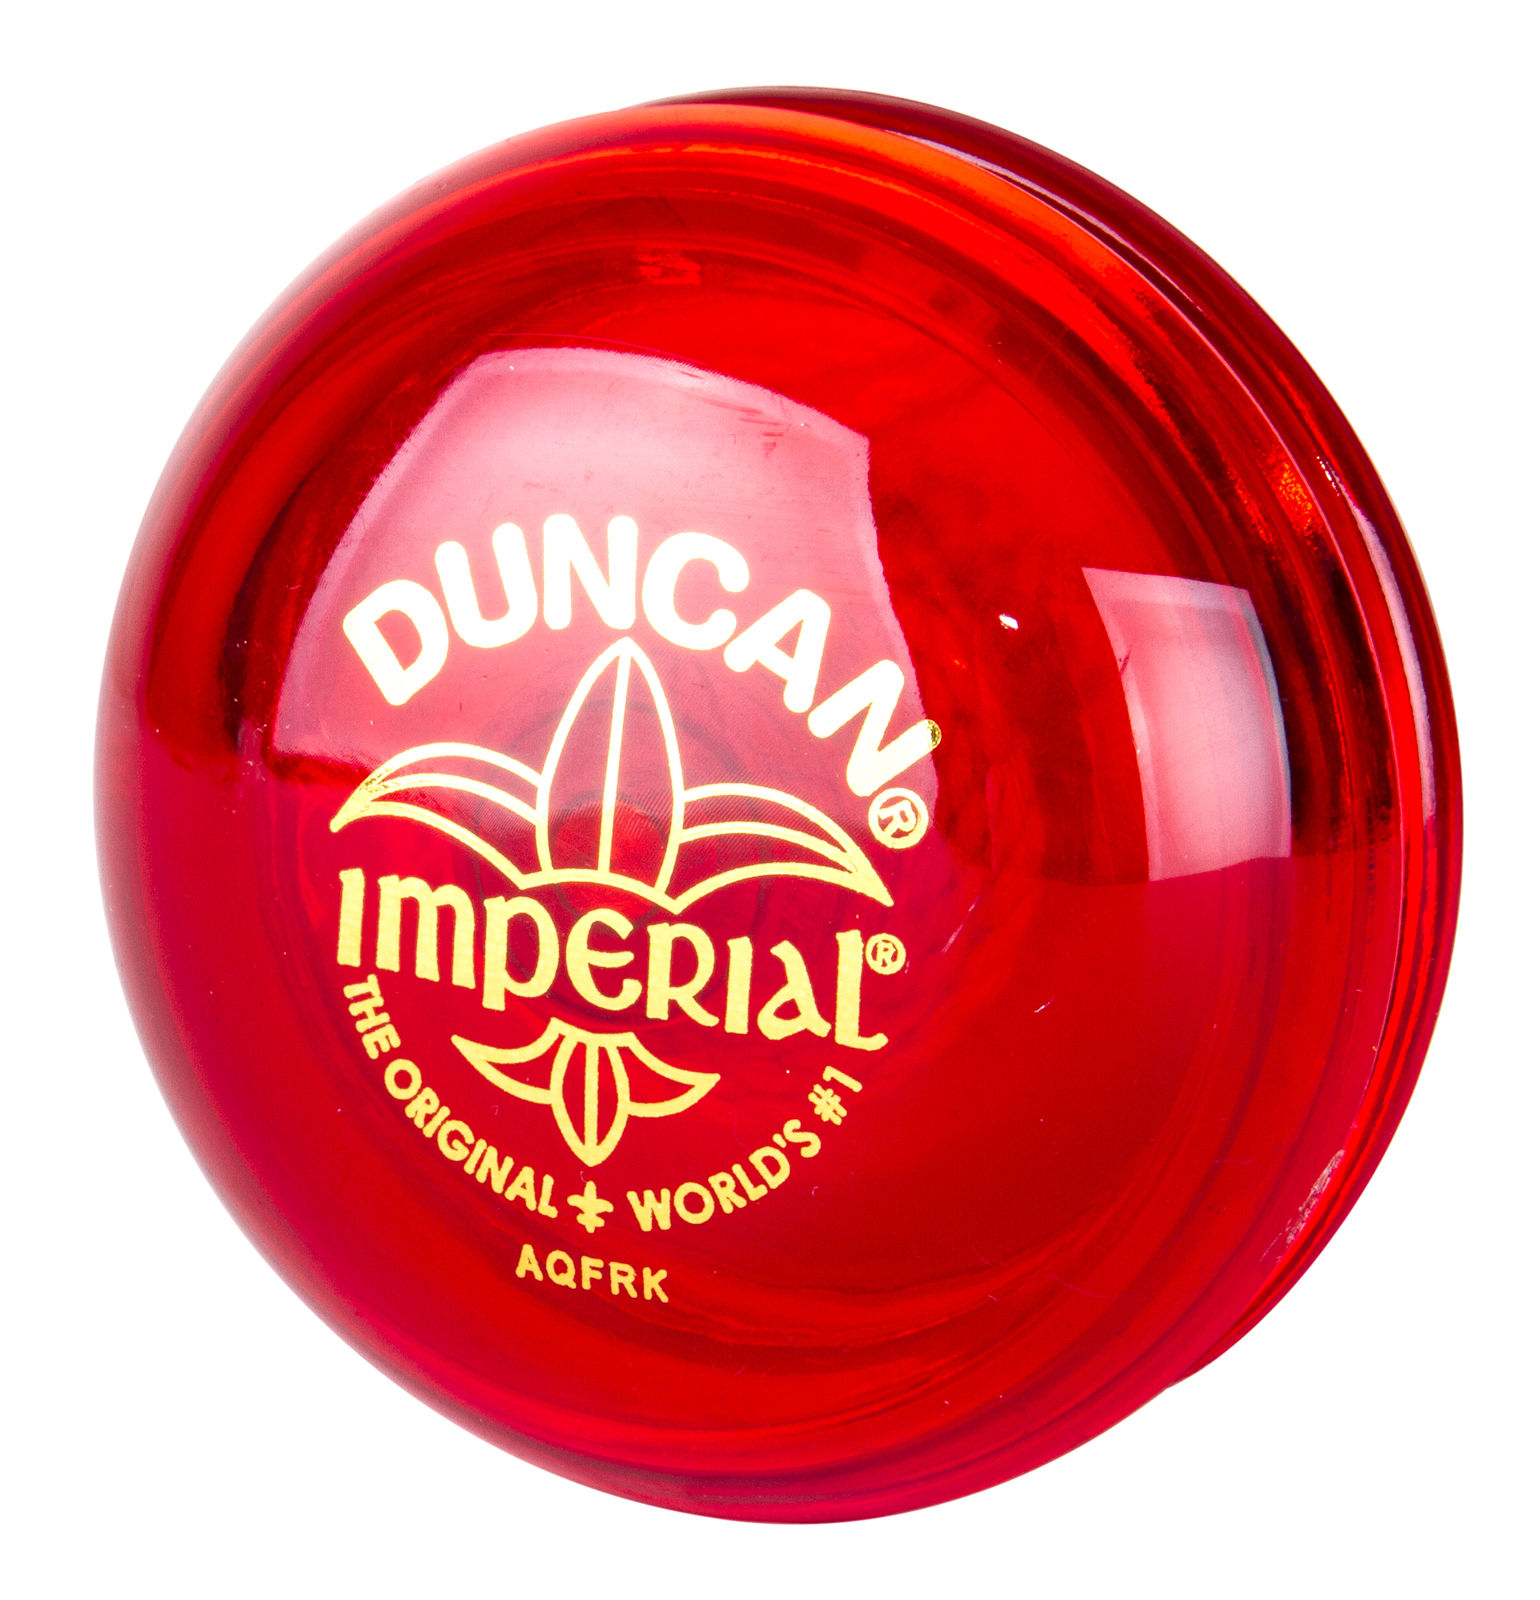 Duncan Toys Imperial Yo-Yo, Beginner Yo-Yo with String, Steel Axle and Plastic Body, Colors May Vary - image 4 of 7